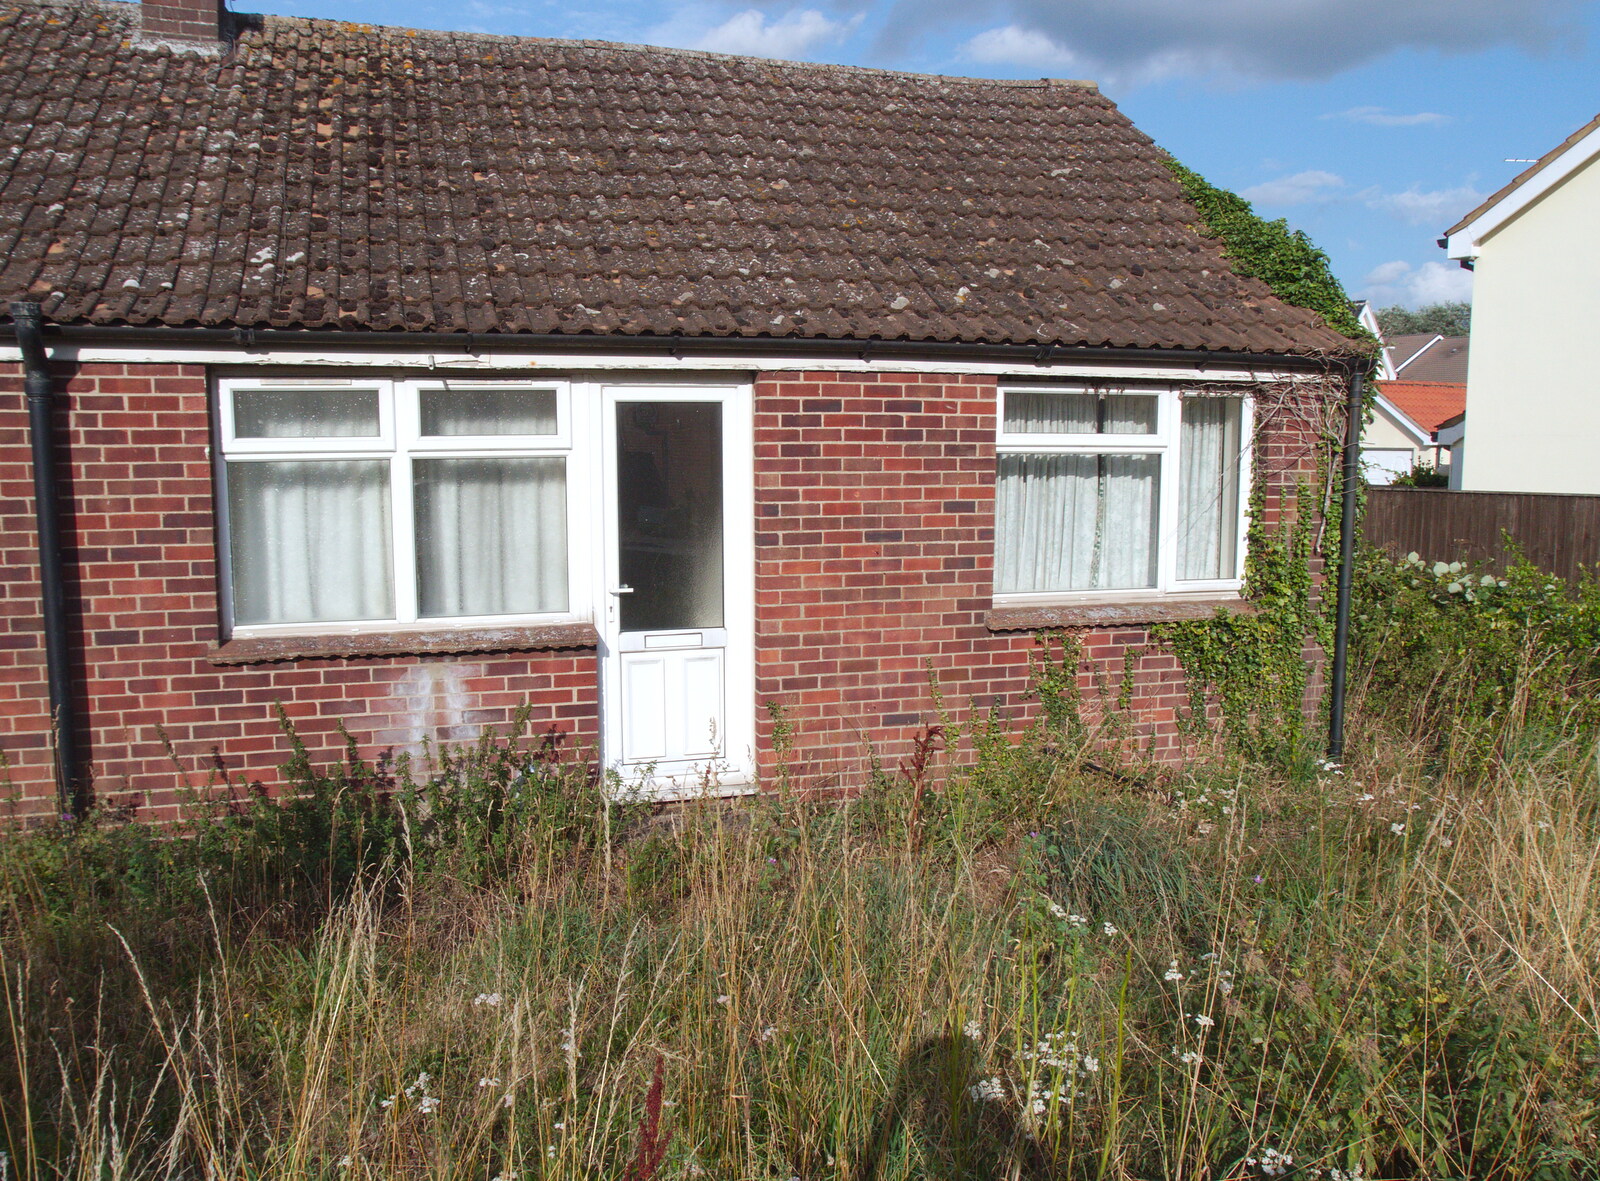 The derelict bungalow near the White Elephant from The BSCC at Redgrave and Railway Graffiti, Suffolk and London - 7th August 2019